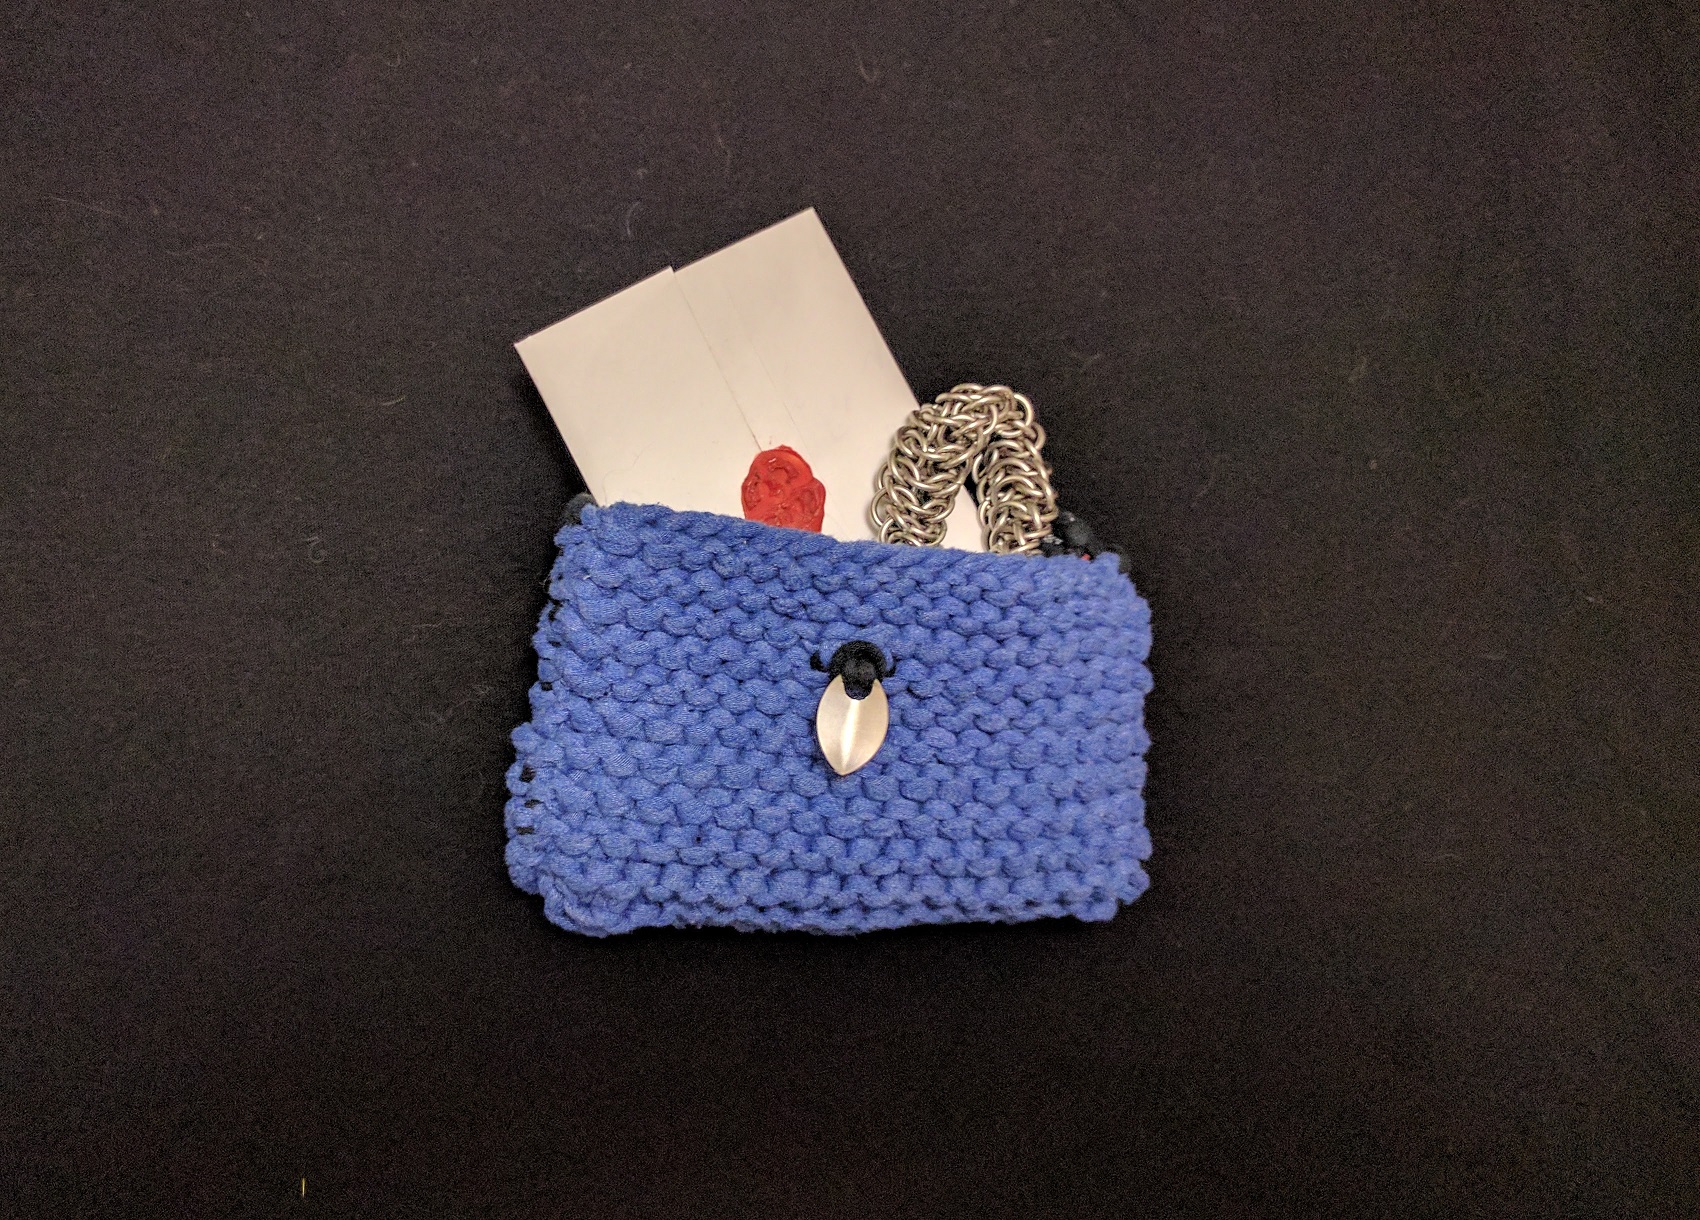 A blue knitted envelope on a black surface, with a wax sealed envelope and chainmaille mobius strip inside.